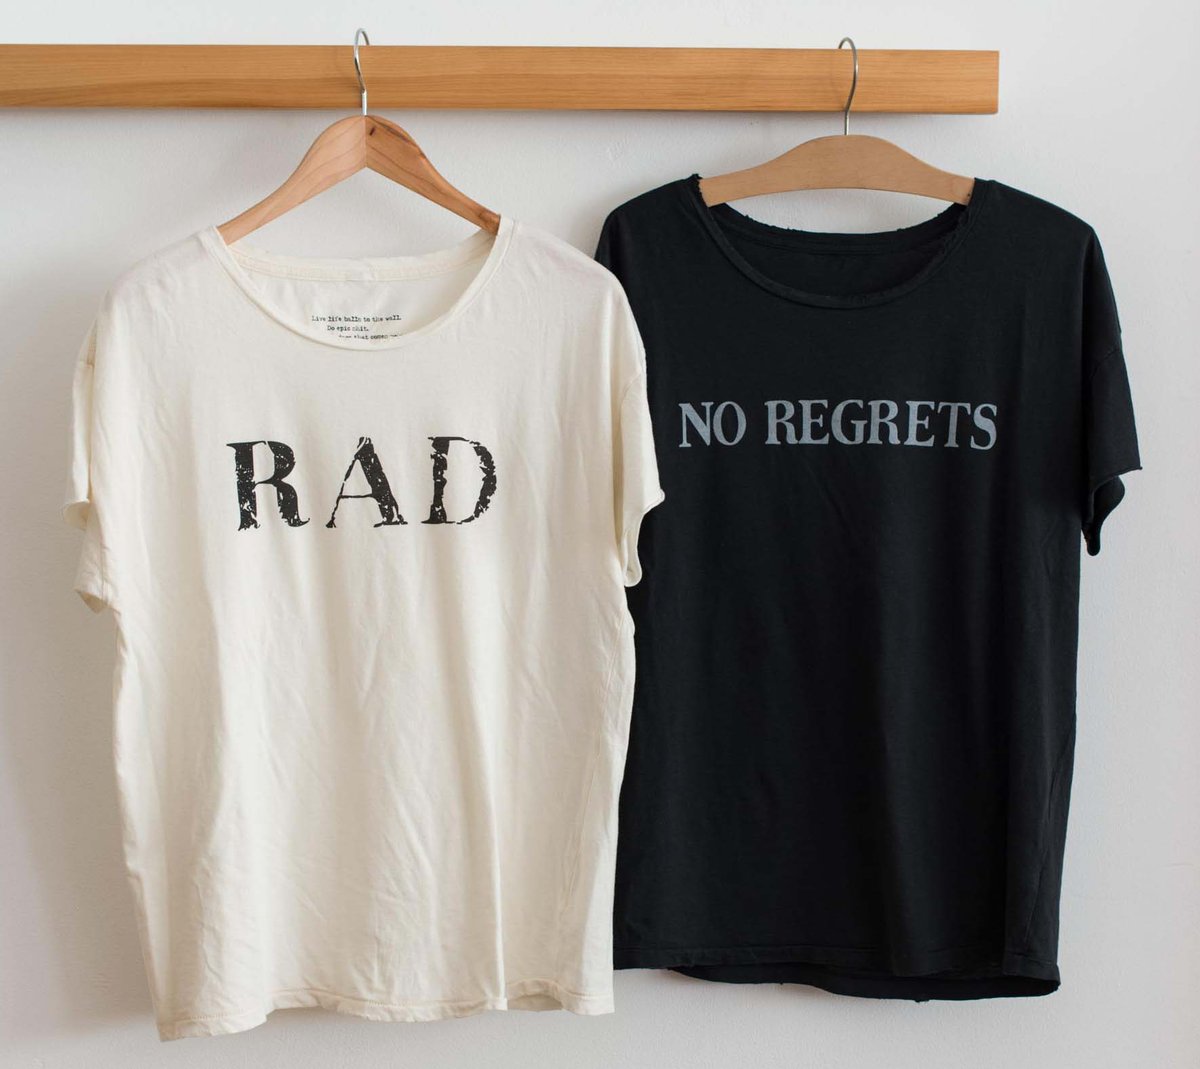 Distressed Tees - No Regrets - 1 Left! / Girl is NOT a 4 Letter Word